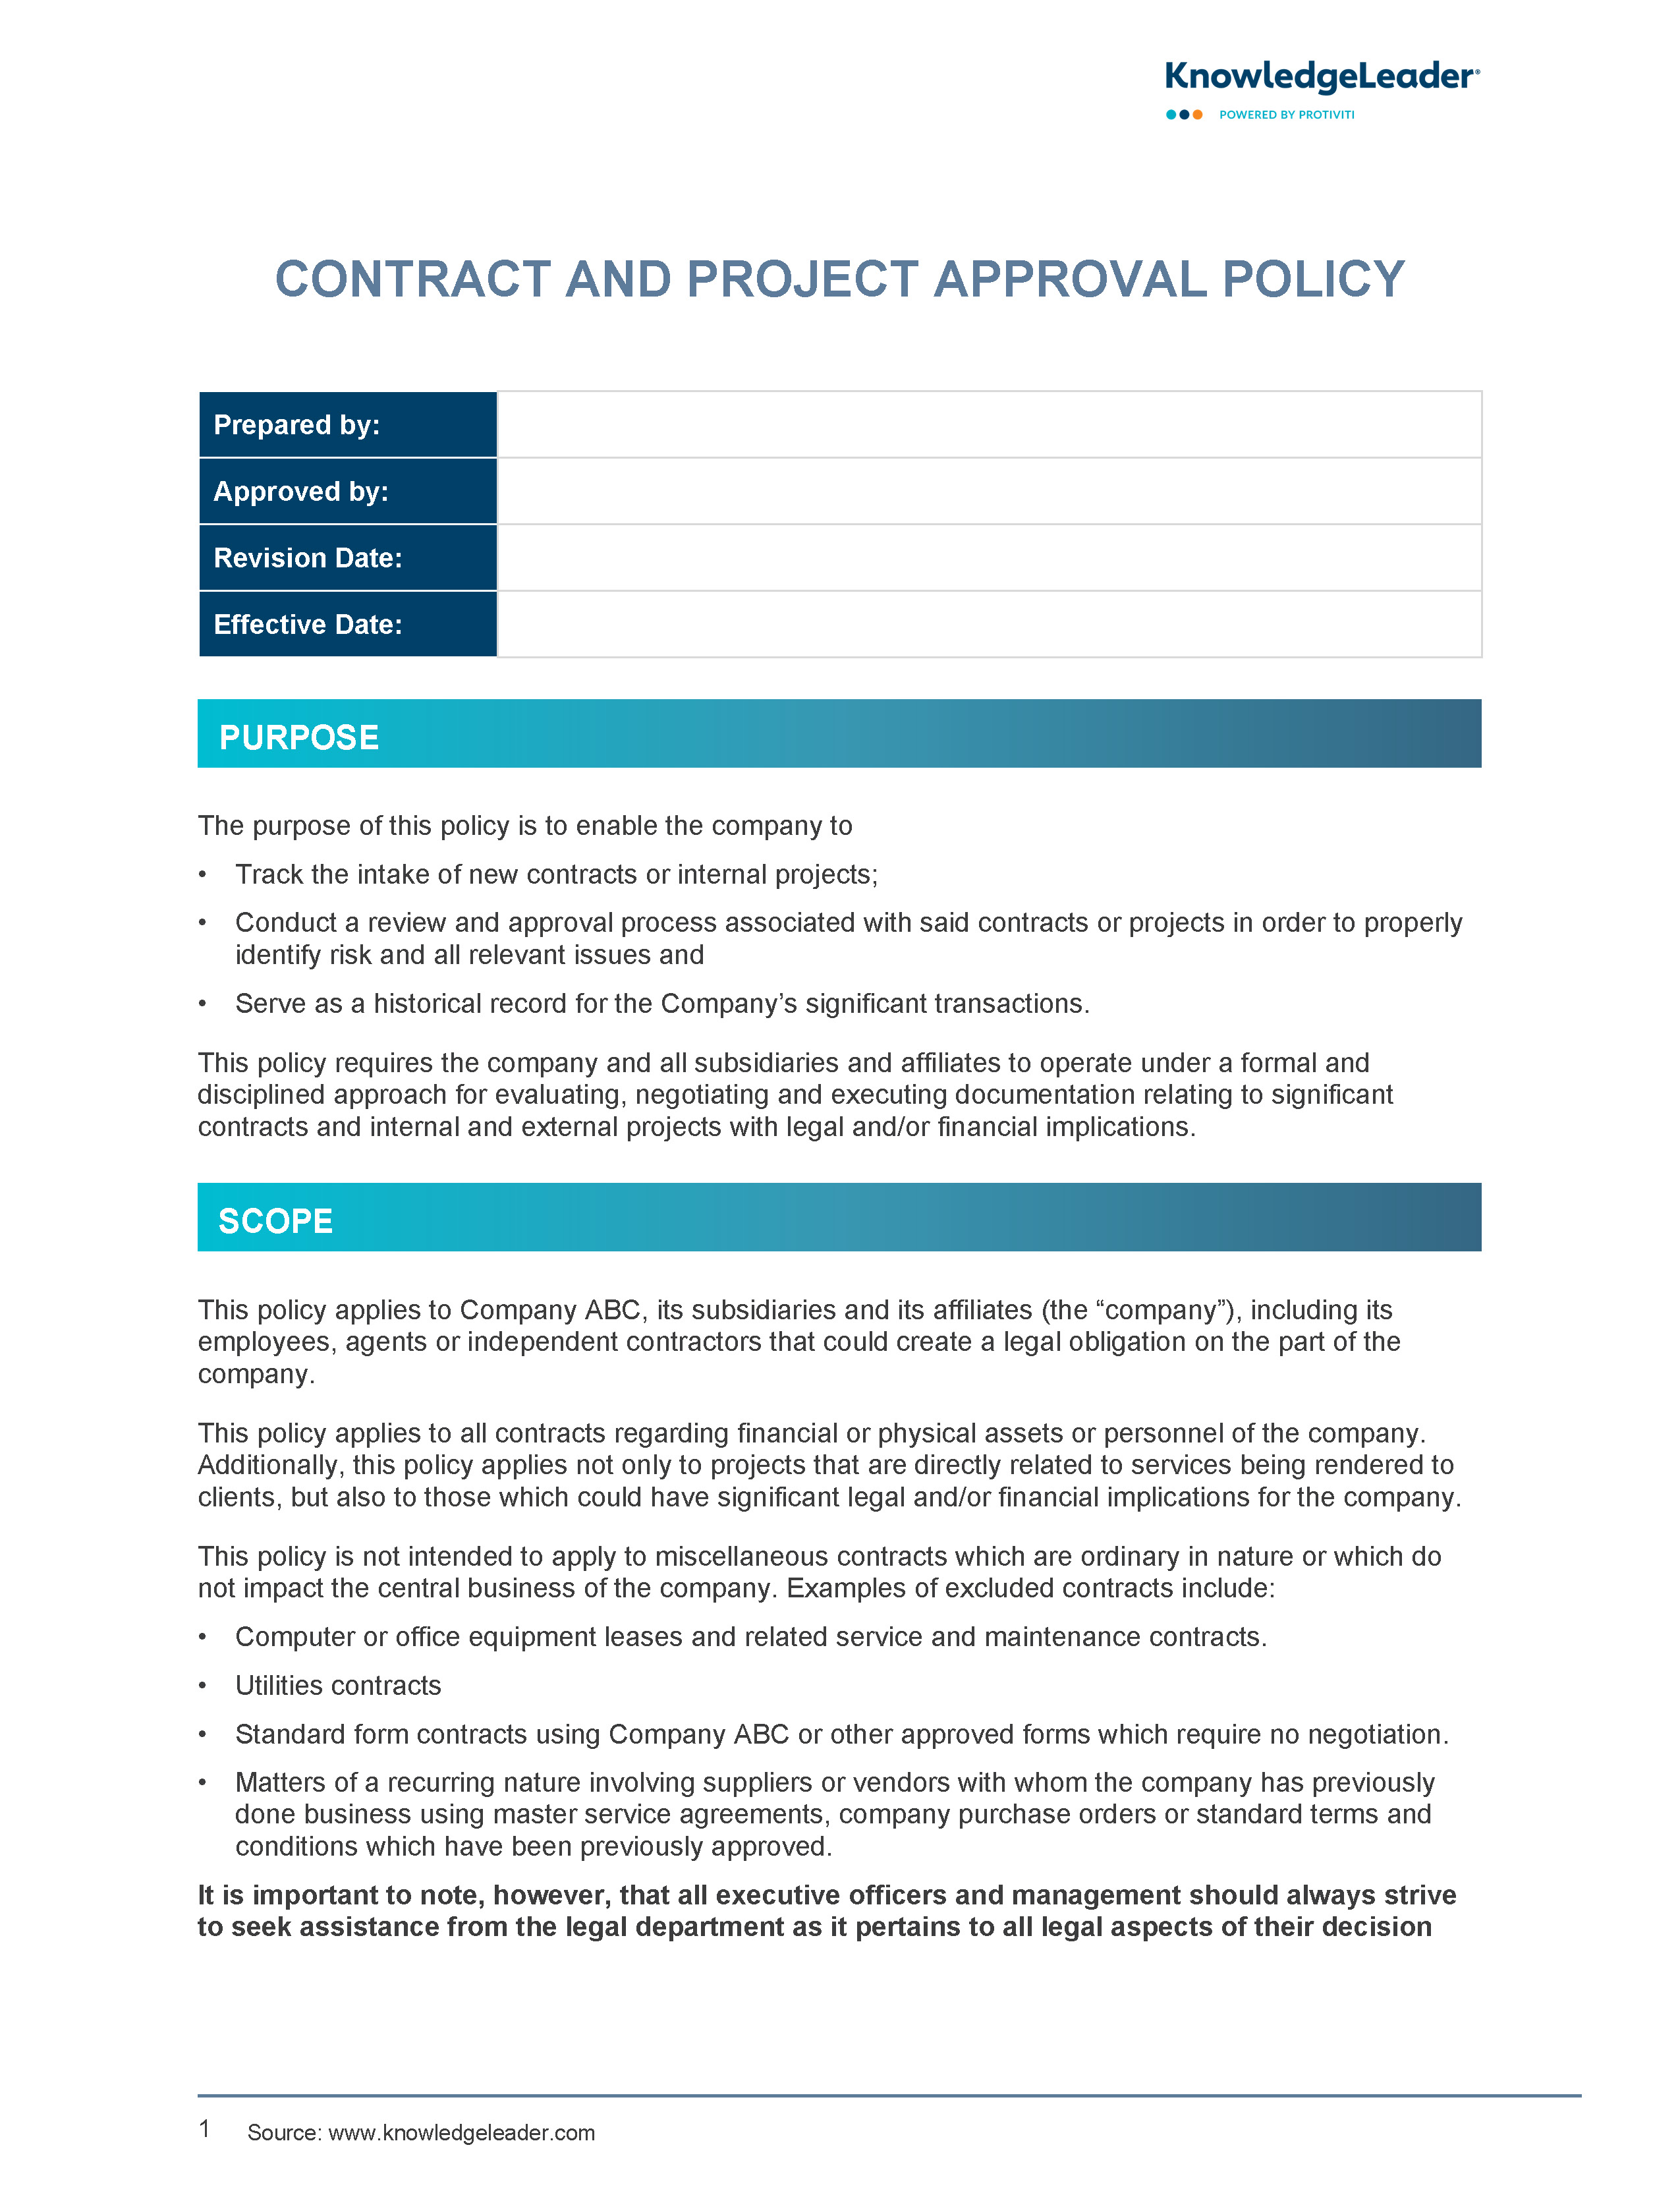 Screenshot of the first page of Contract and Project Approval Policy